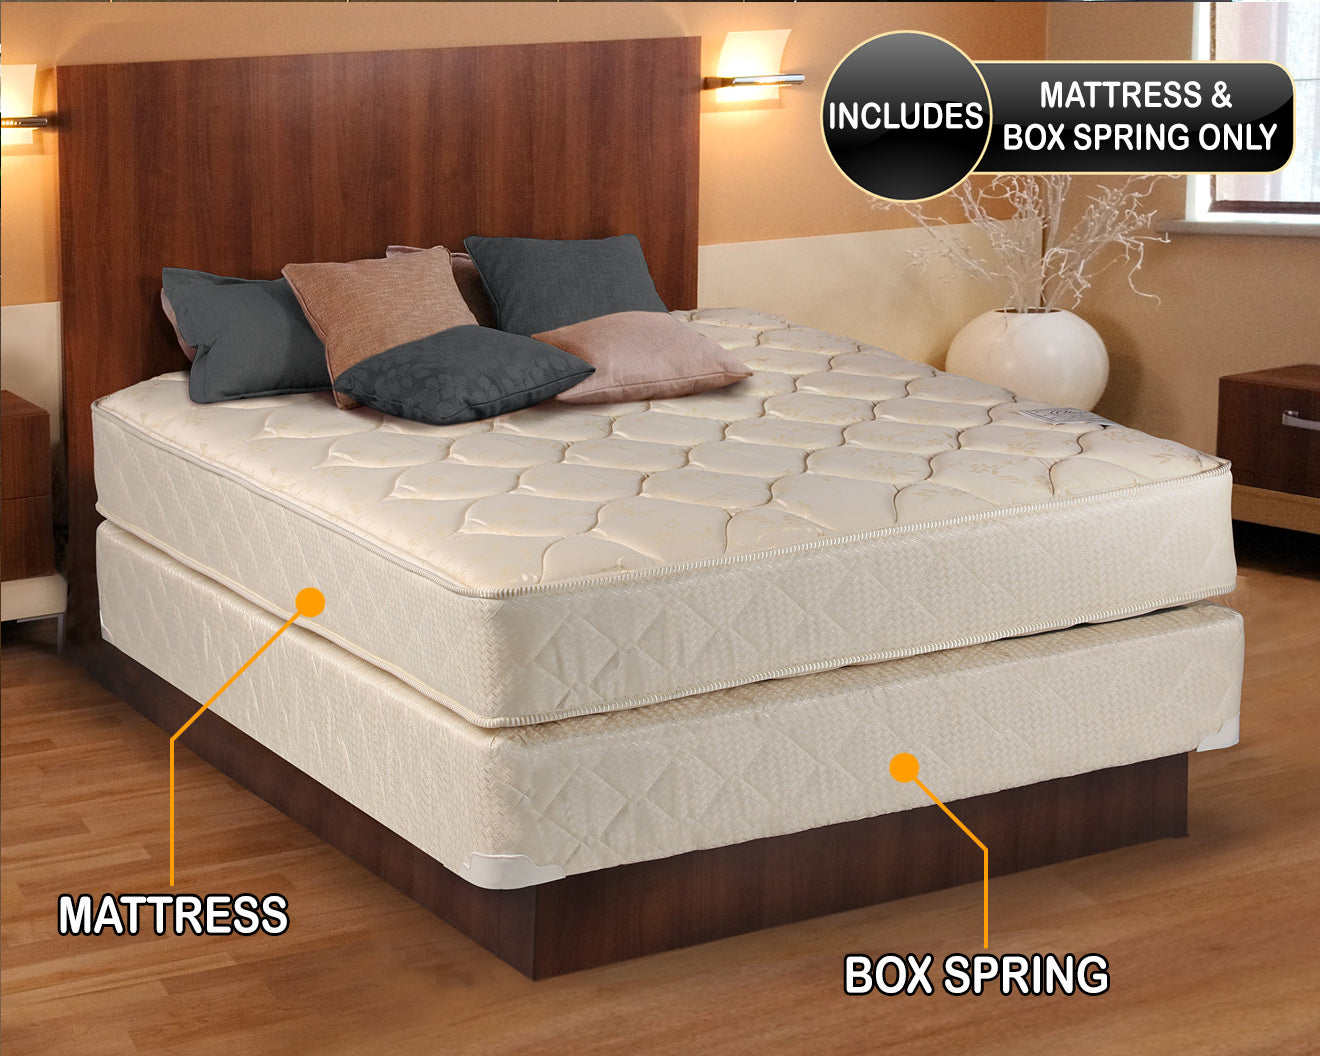 Comfort Classic Gentle Firm Twin Size Mattress and Box Spring Set - Fully Assembled, Orthopedic, Good for Your Back, Long Lasting and 2 Sided